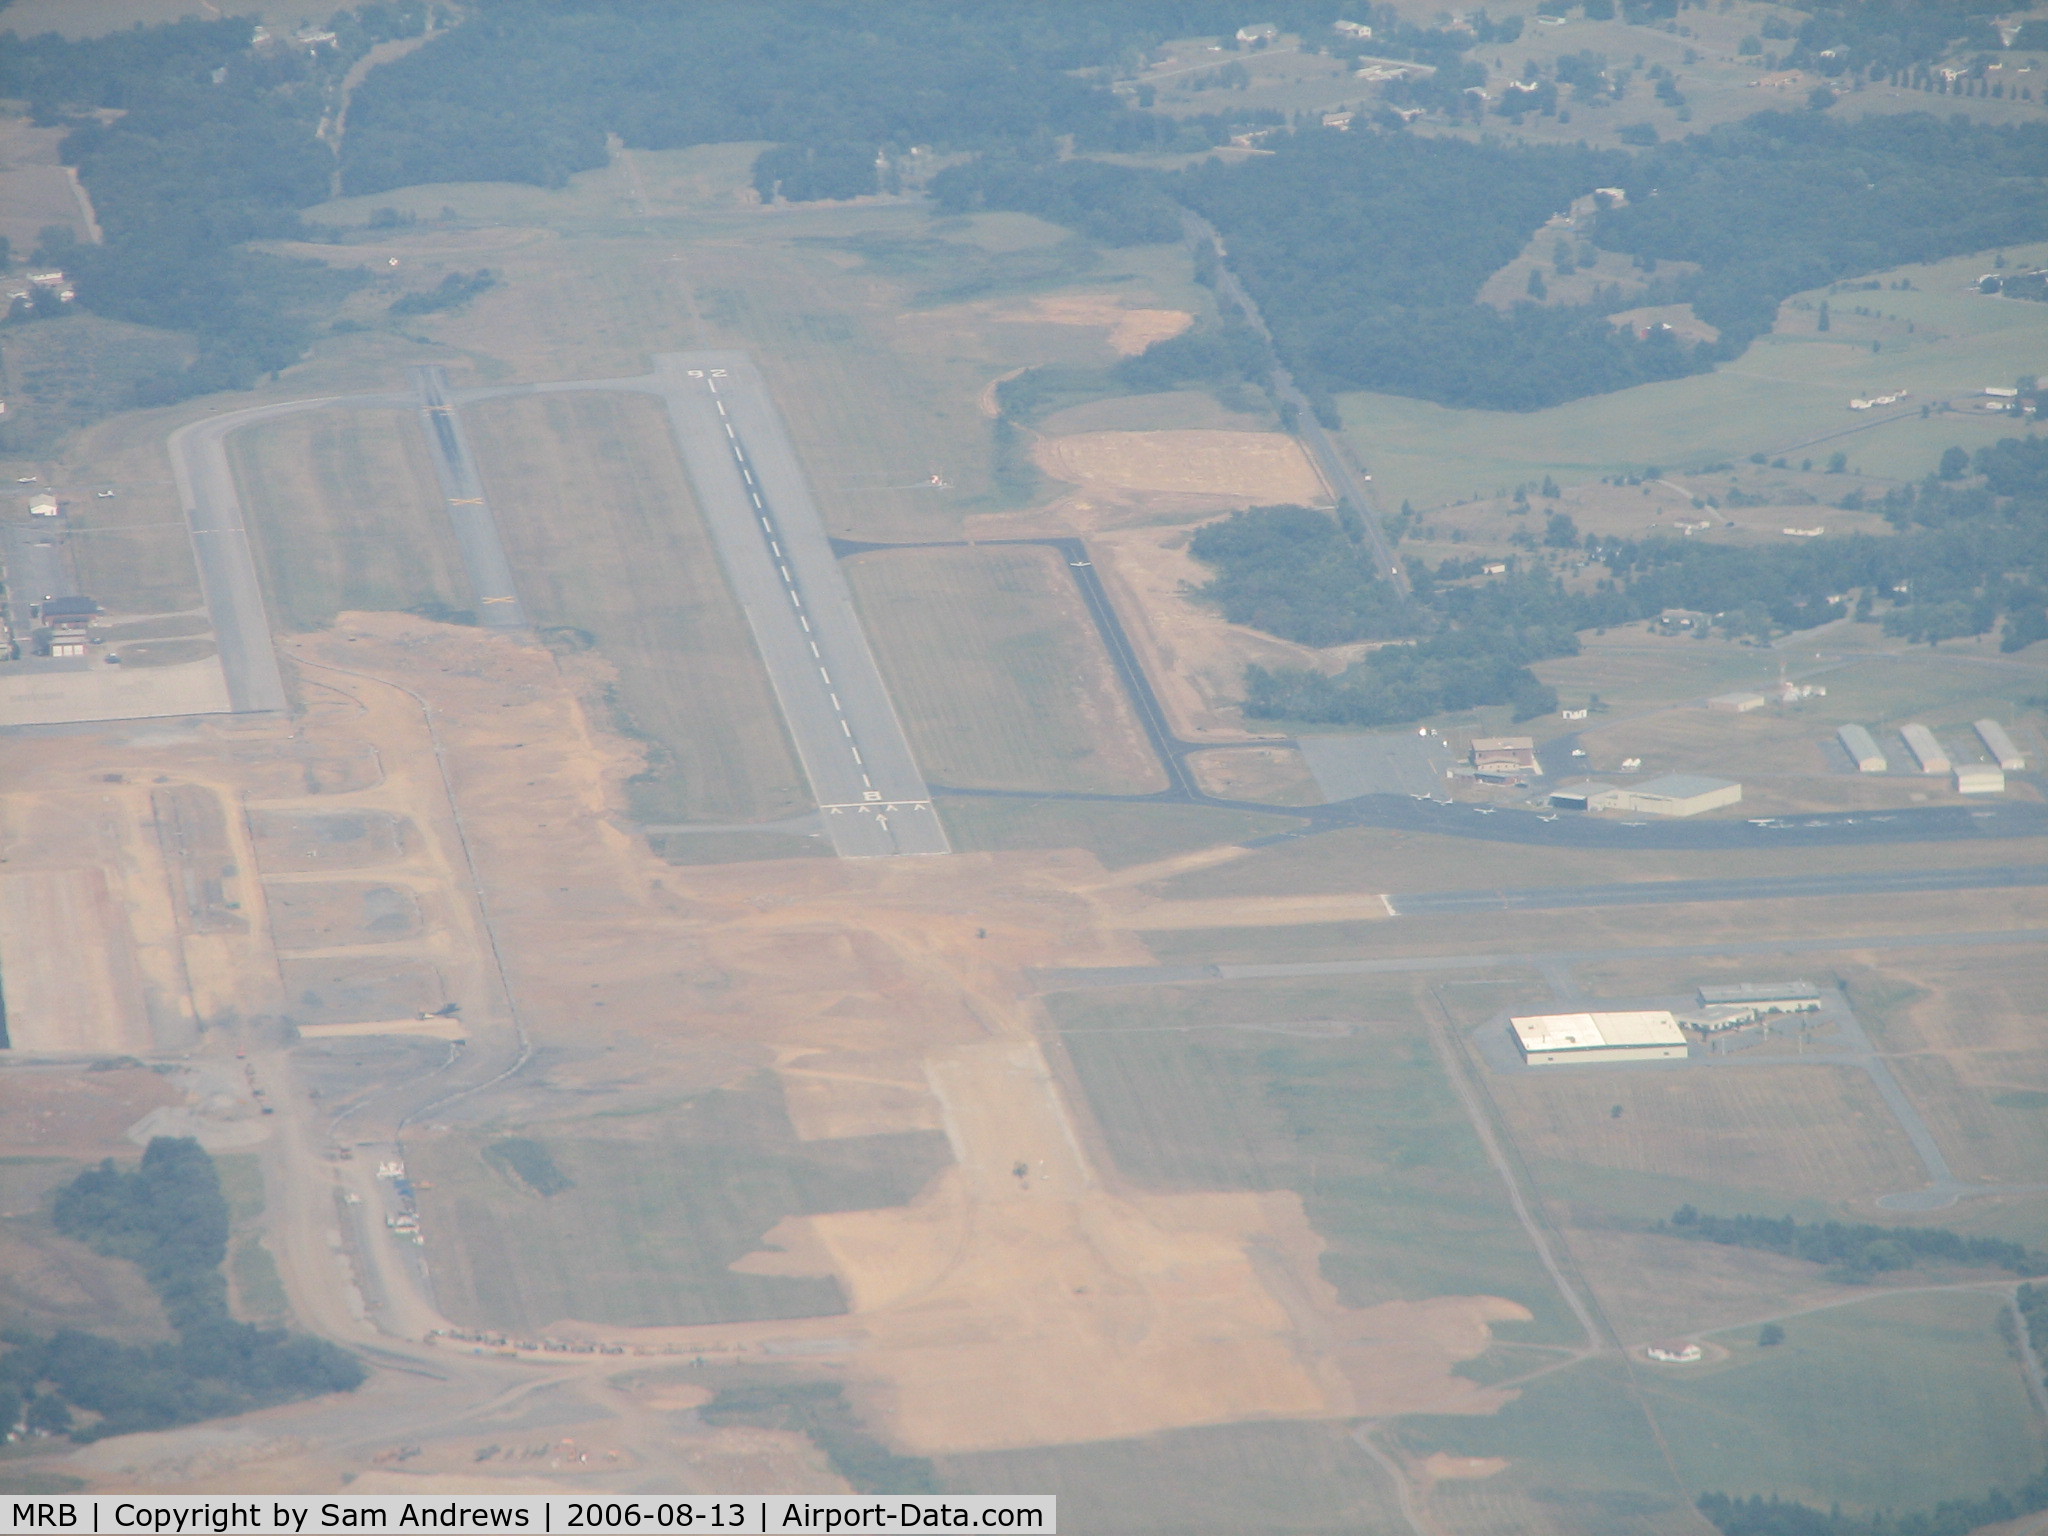 Eastern Wv Rgnl/shepherd Fld Airport (MRB) - They are making some serious improvements here.  I hope they are improvements.